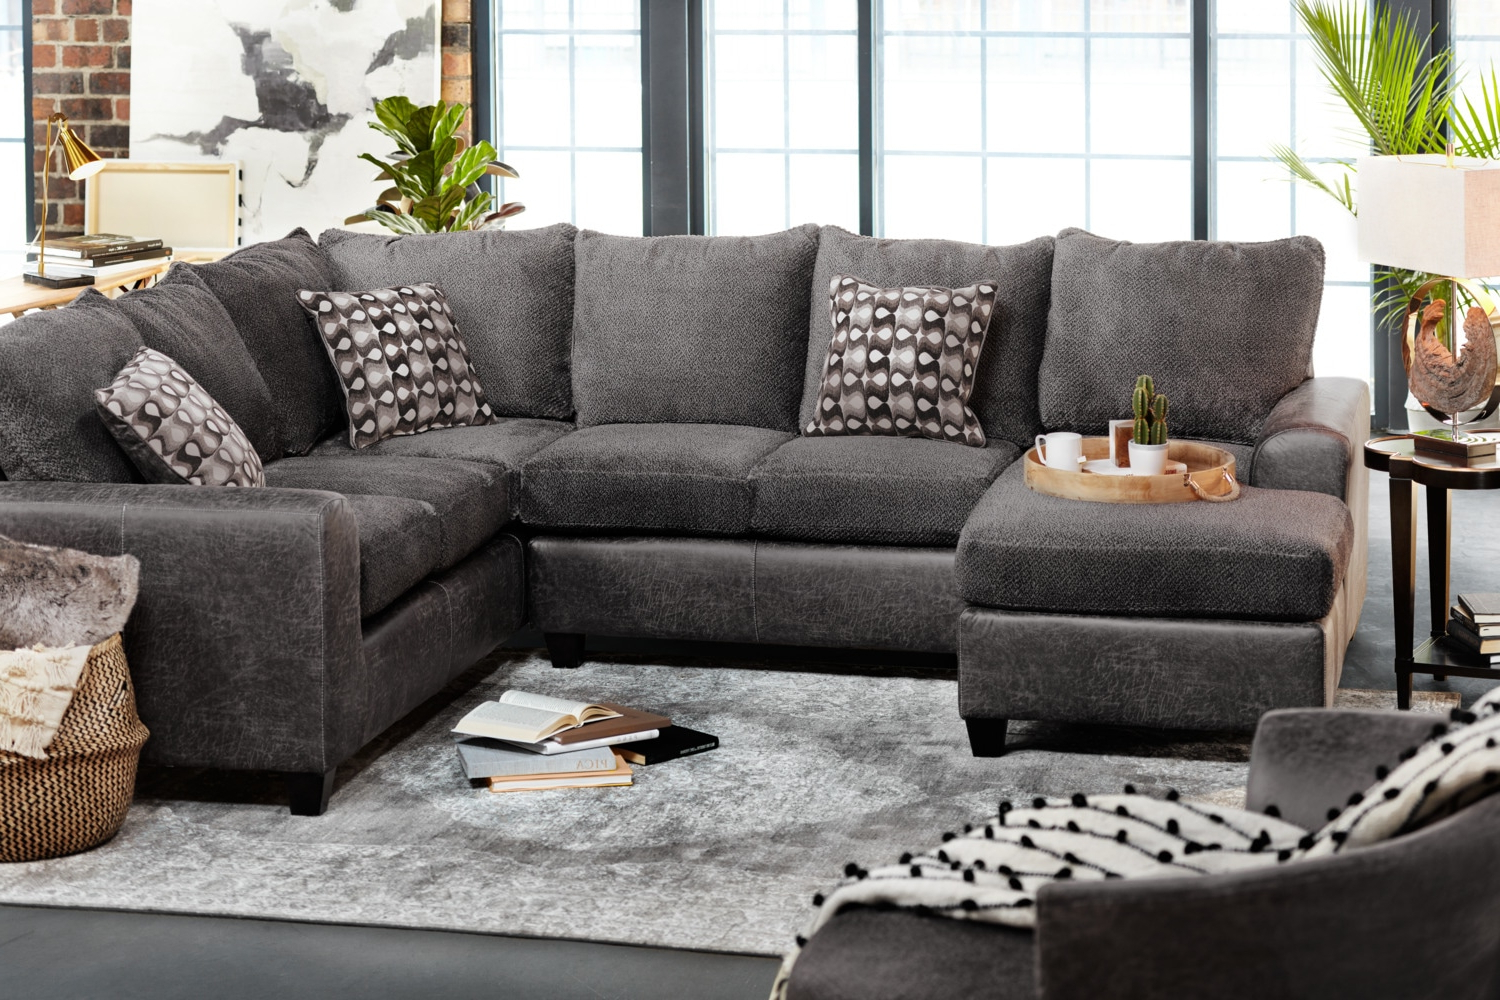 Malbry Point 3 Piece Sectionals With Laf Chaise